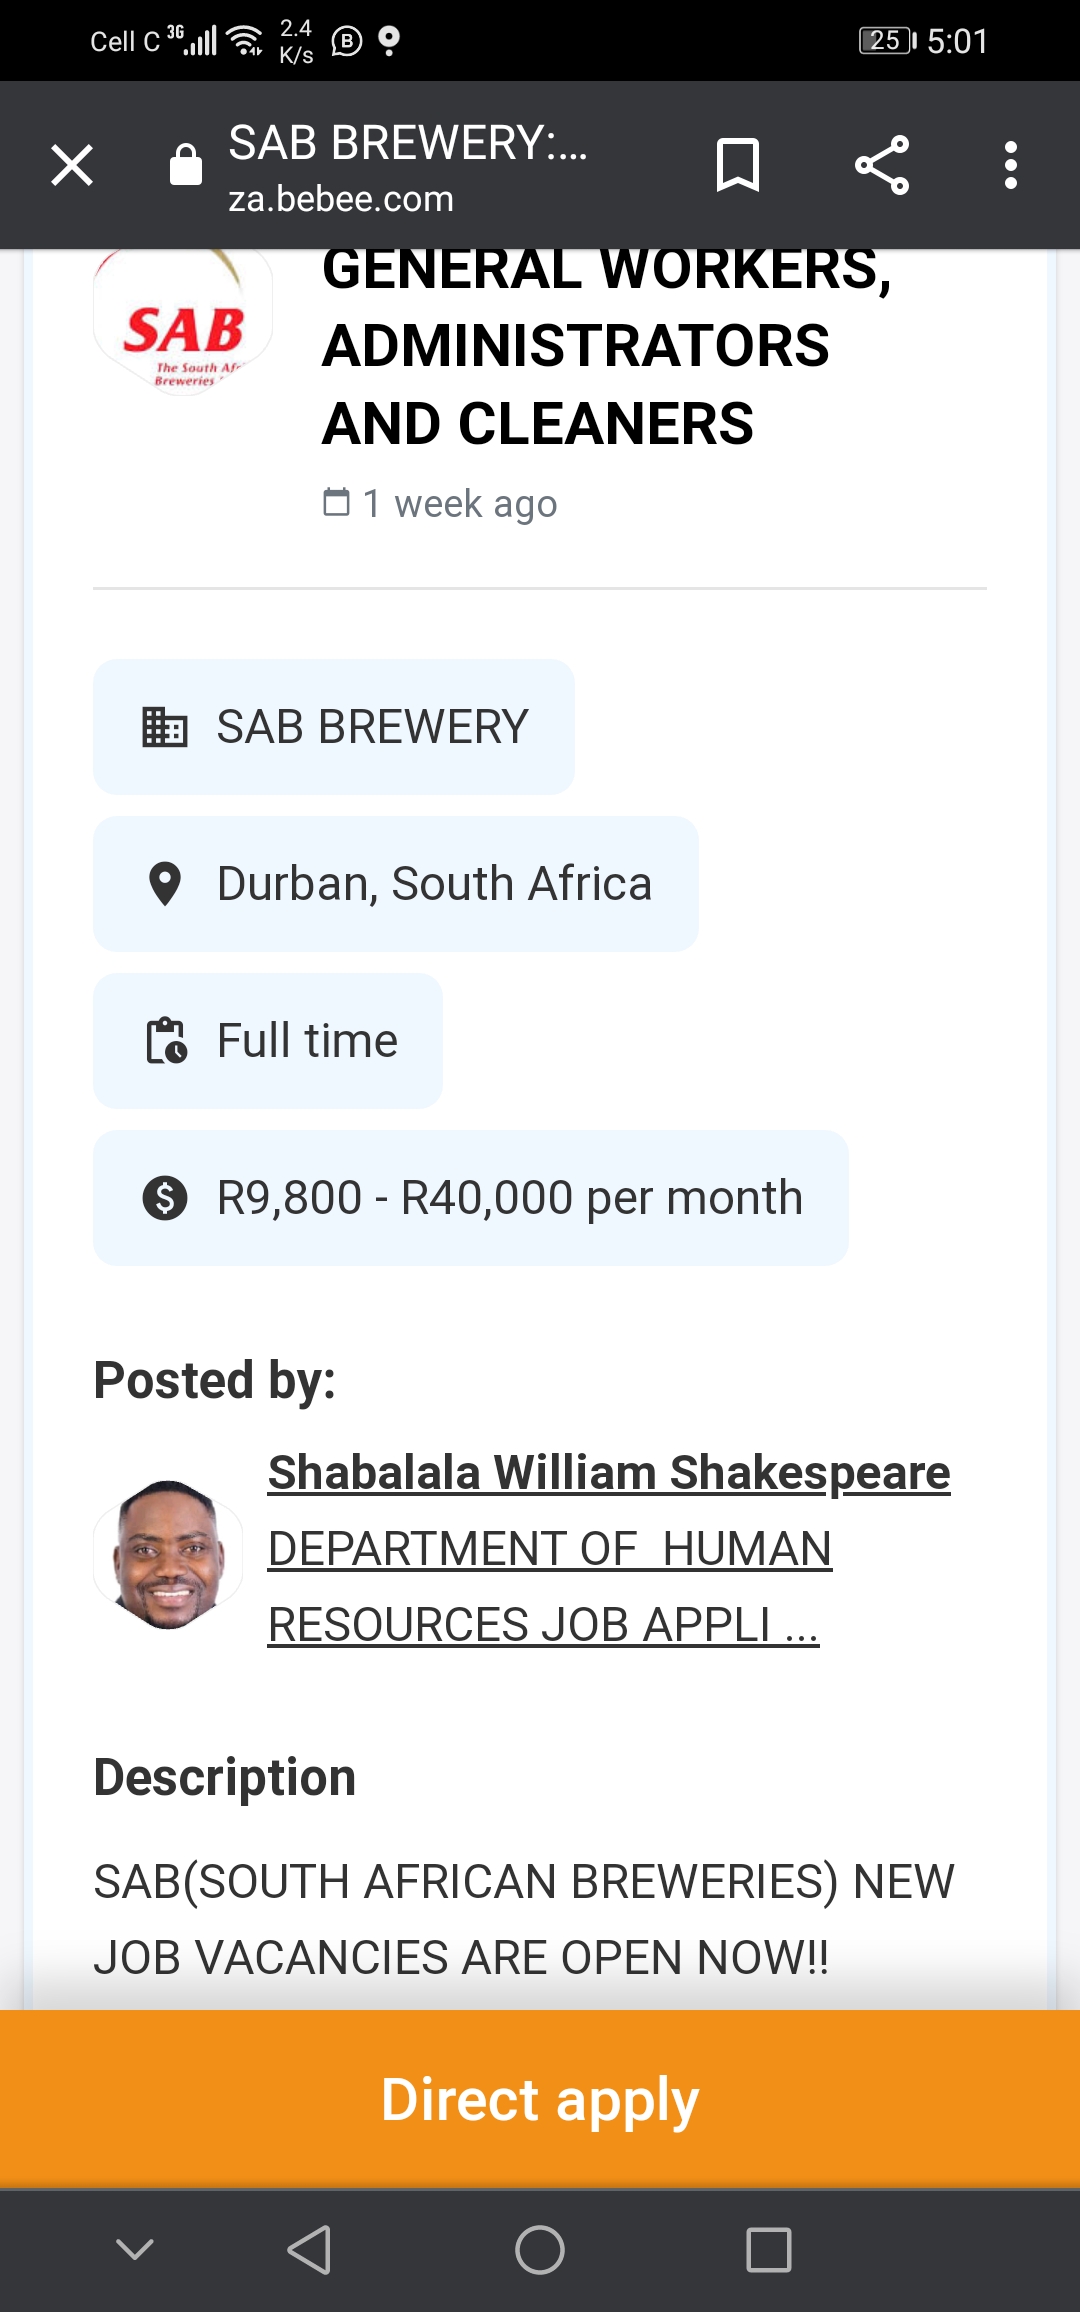 celica ® i: ® © [PEYE)

4 SAB BREWERY...

za.bebee.com

 

SAB ADMINISTRATORS
AND CLEANERS

8 1 week ago

fa SAB BREWERY
Q@ Durban, South Africa
[o Full time

© R9,800 - R40,000 per month

Posted by:

DEPARTMENT OF HUMAN

Shabalala William Shakespeare
& RESOURCES JOB APPLI ...

Description

SAB(SOUTH AFRICAN BREWERIES) NEW
JOB VACANCIES ARE OPEN NOW!